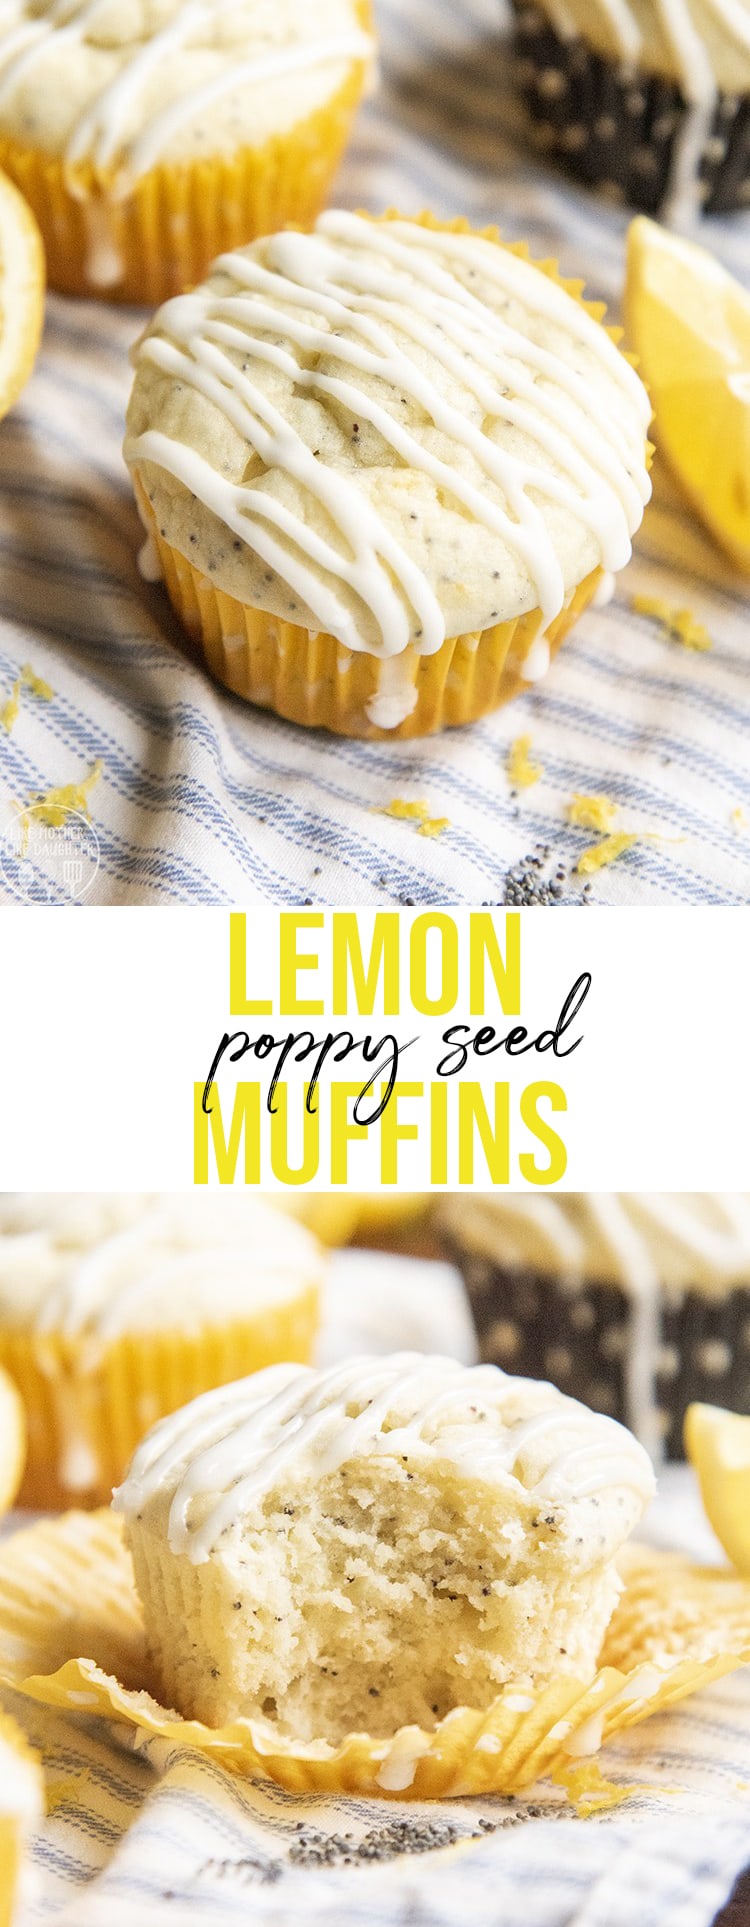 These lemon poppy seed muffins taste just like you'd get from a bakery, with a tender, moist, lemon muffin, topped with the best tangy lemon glaze.